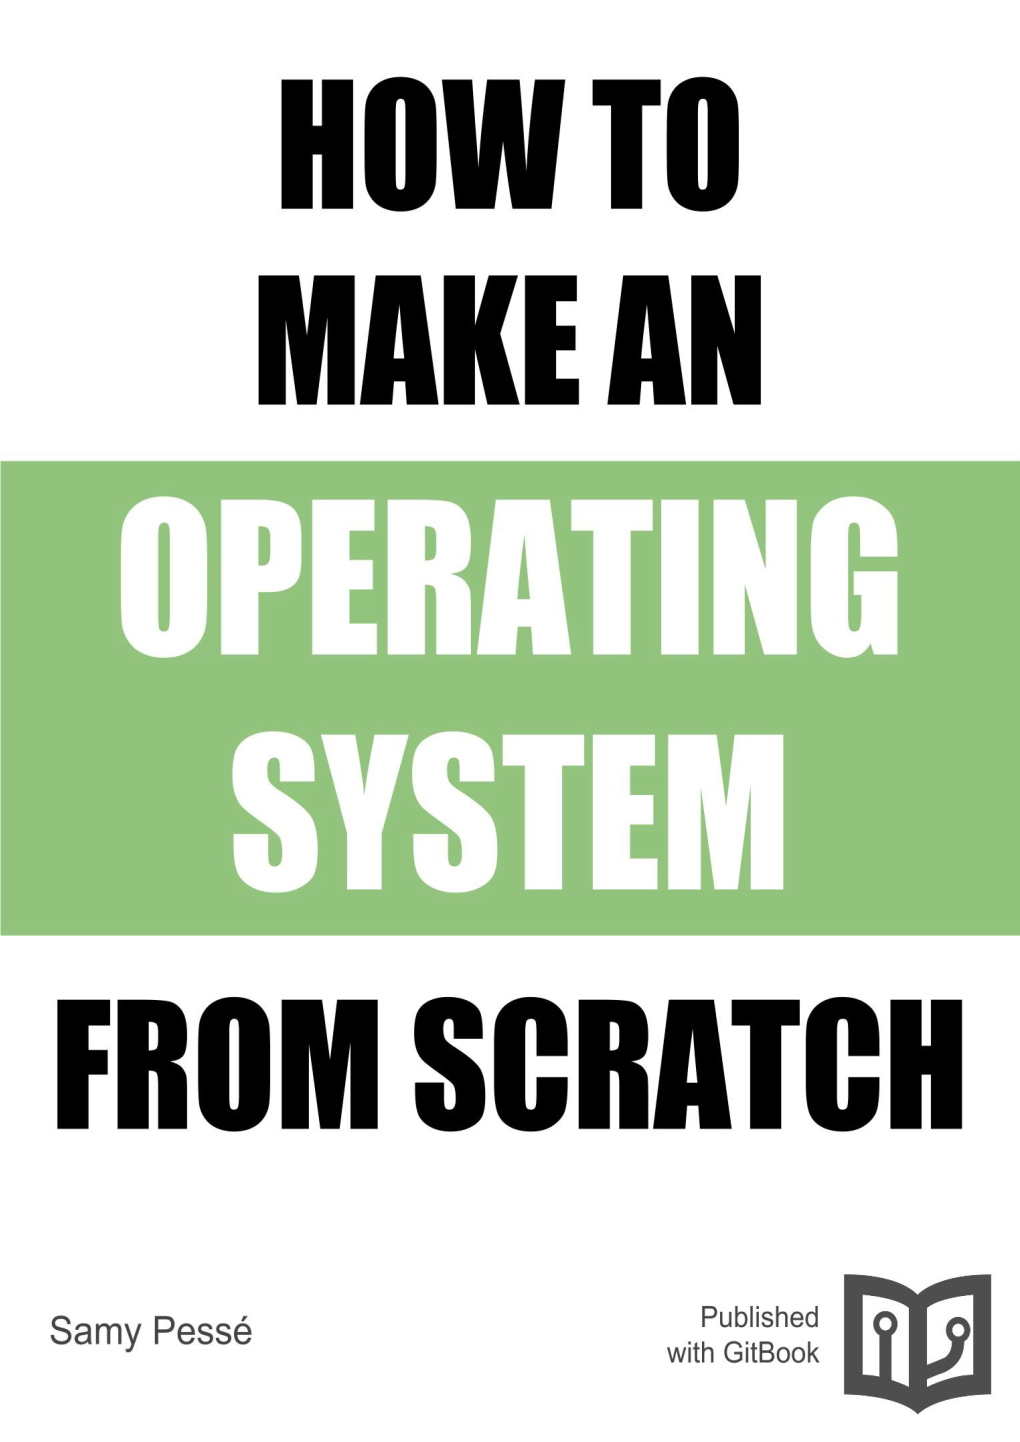 How to Make an Operating System from Scratch